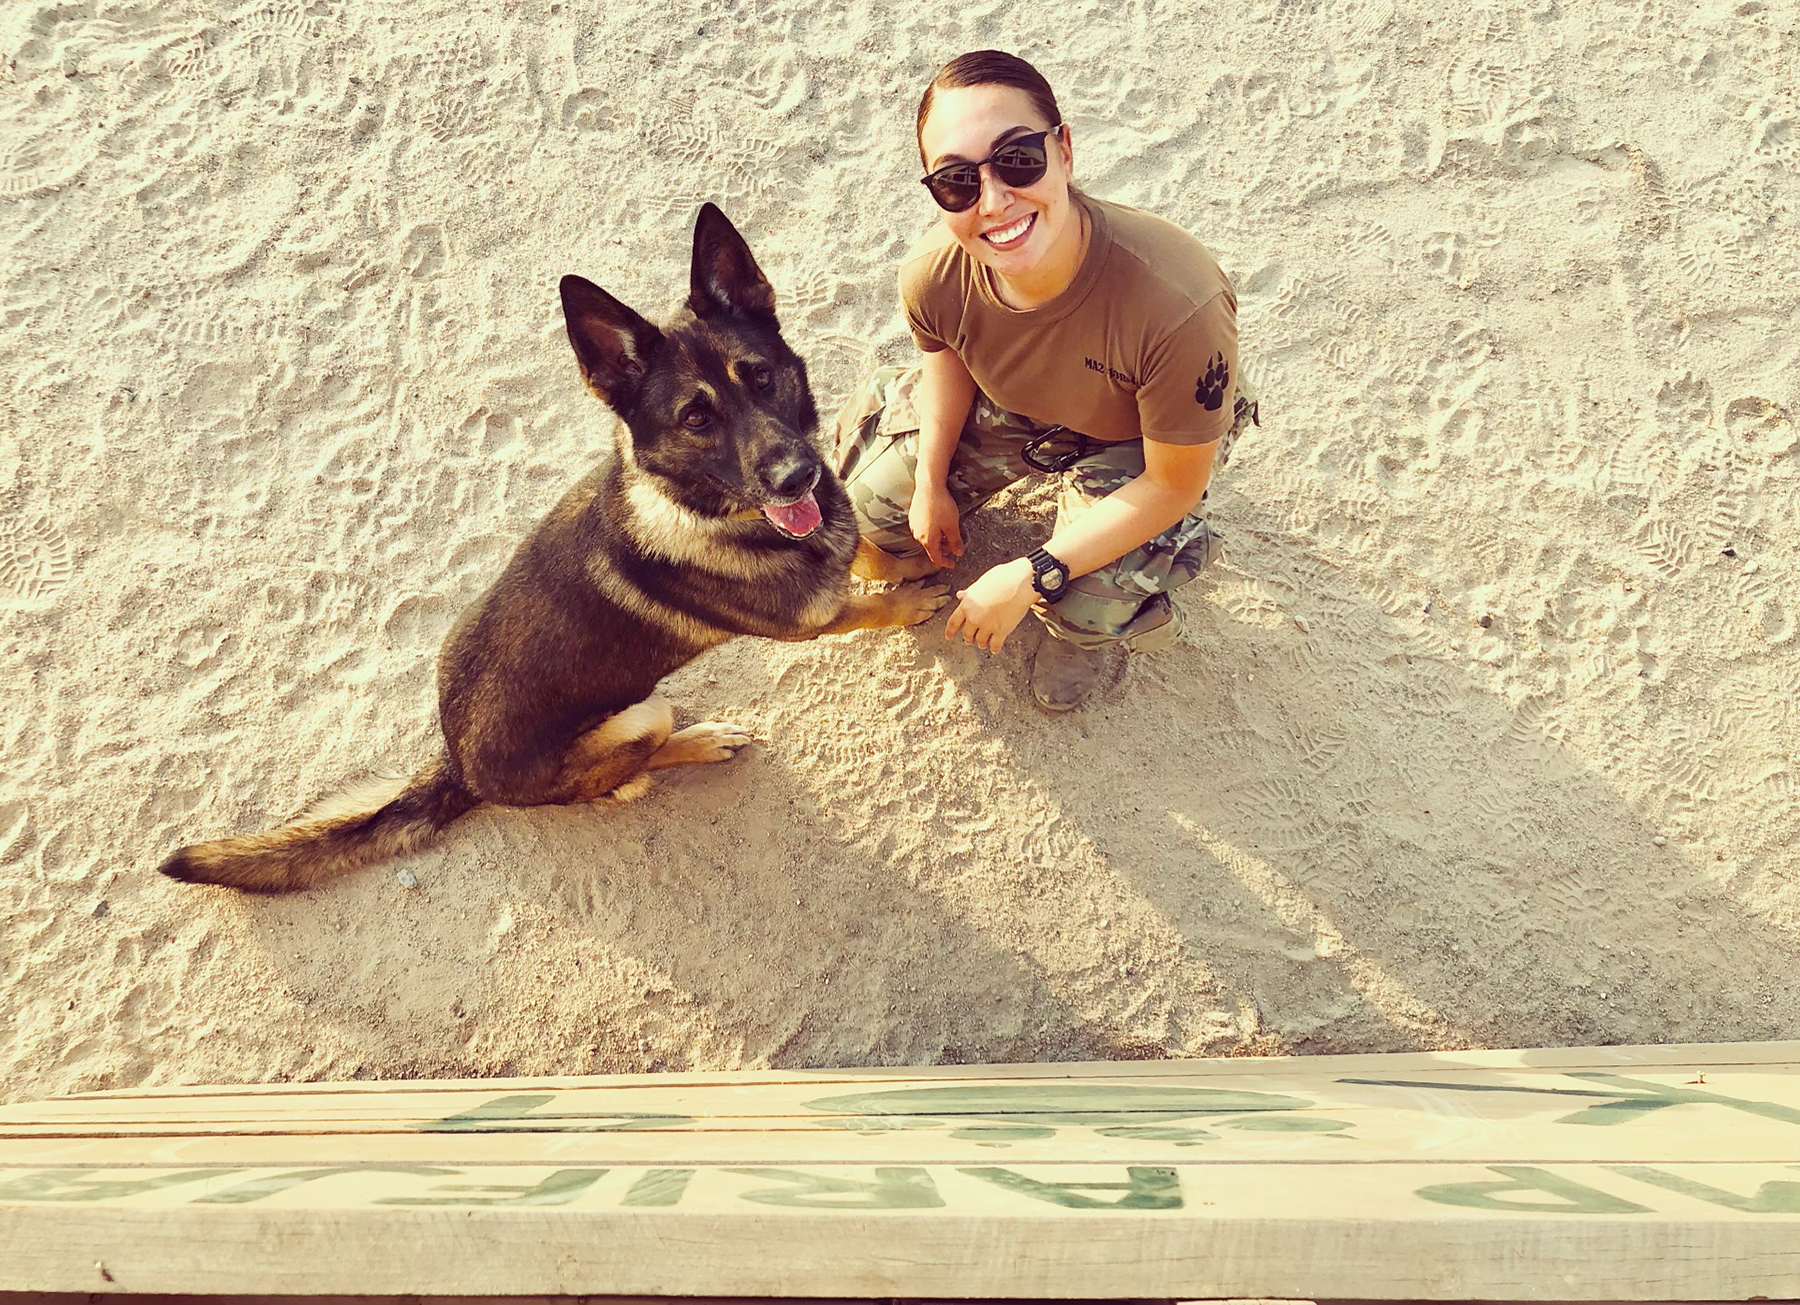 MA1 Brianna Flores with a military working dog